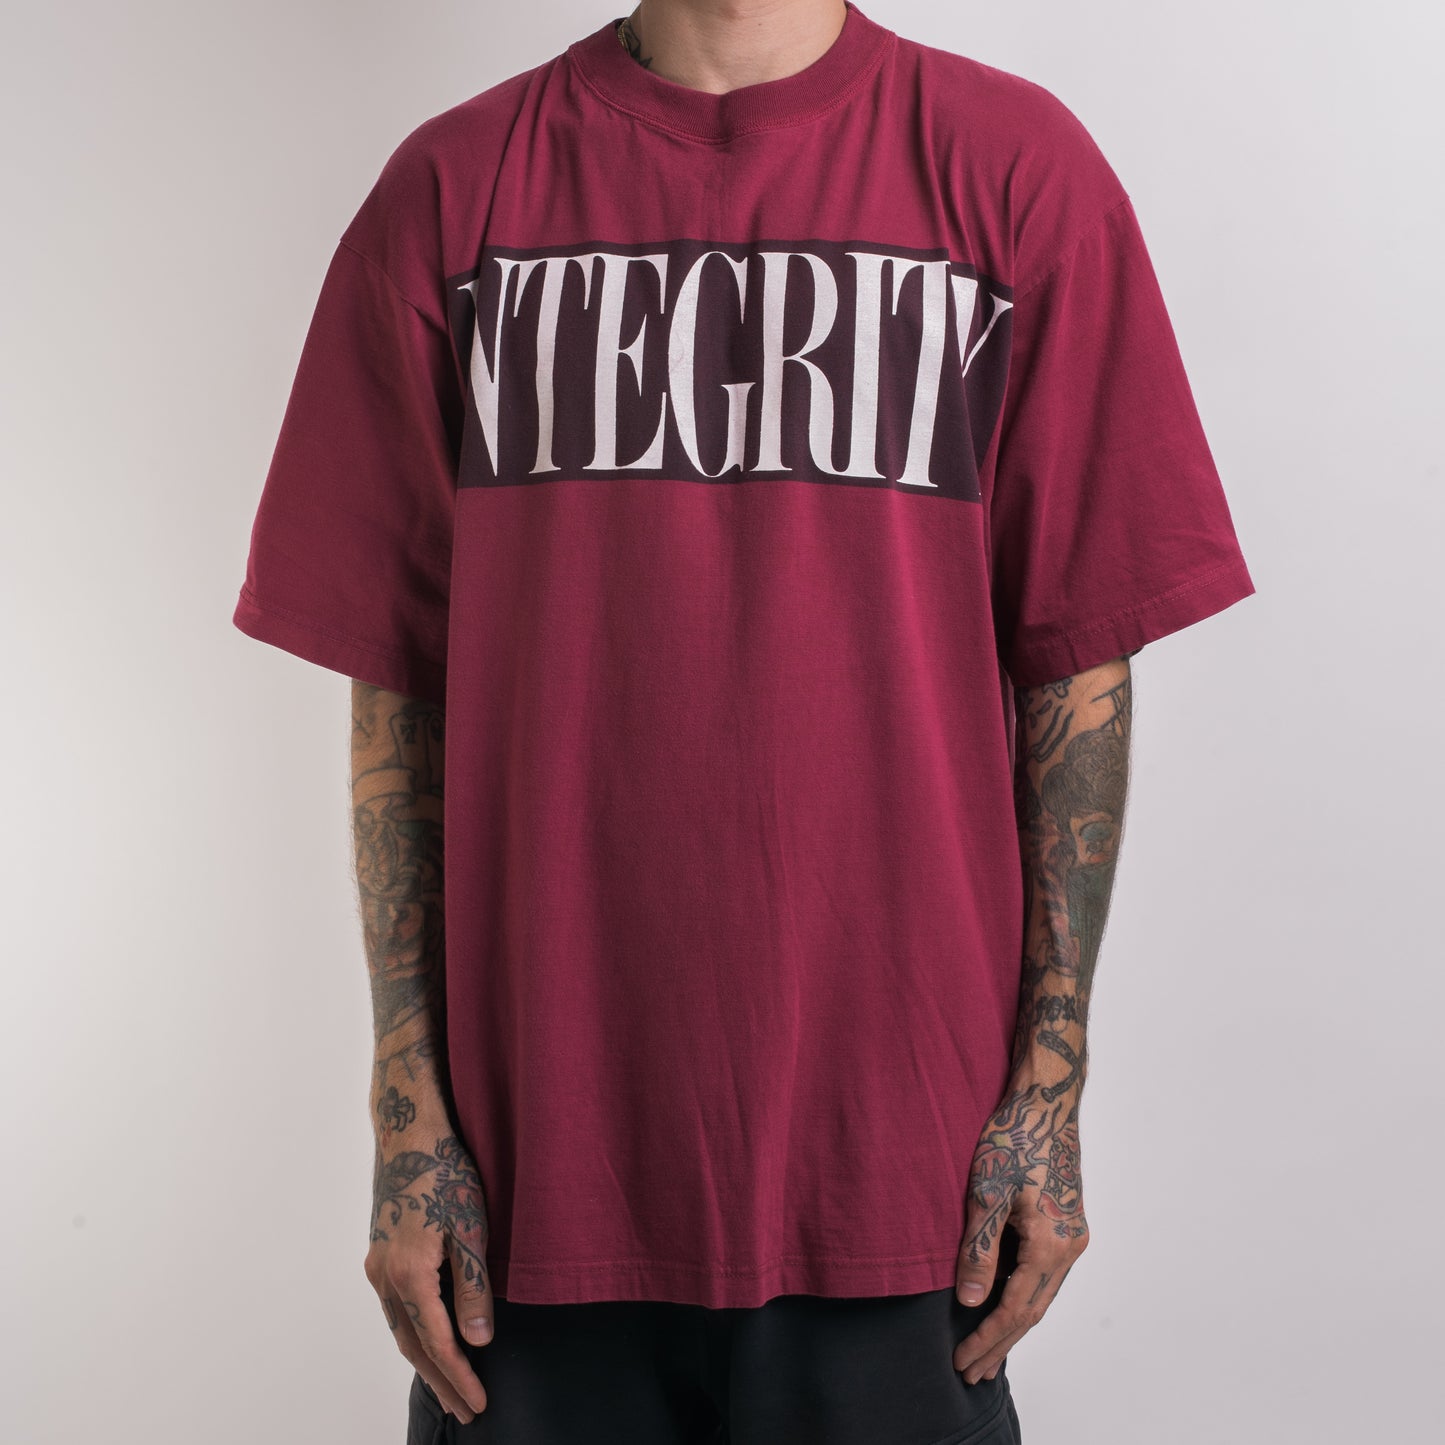 Vintage 90’s Integrity Den Of Iniquity T-Shirt